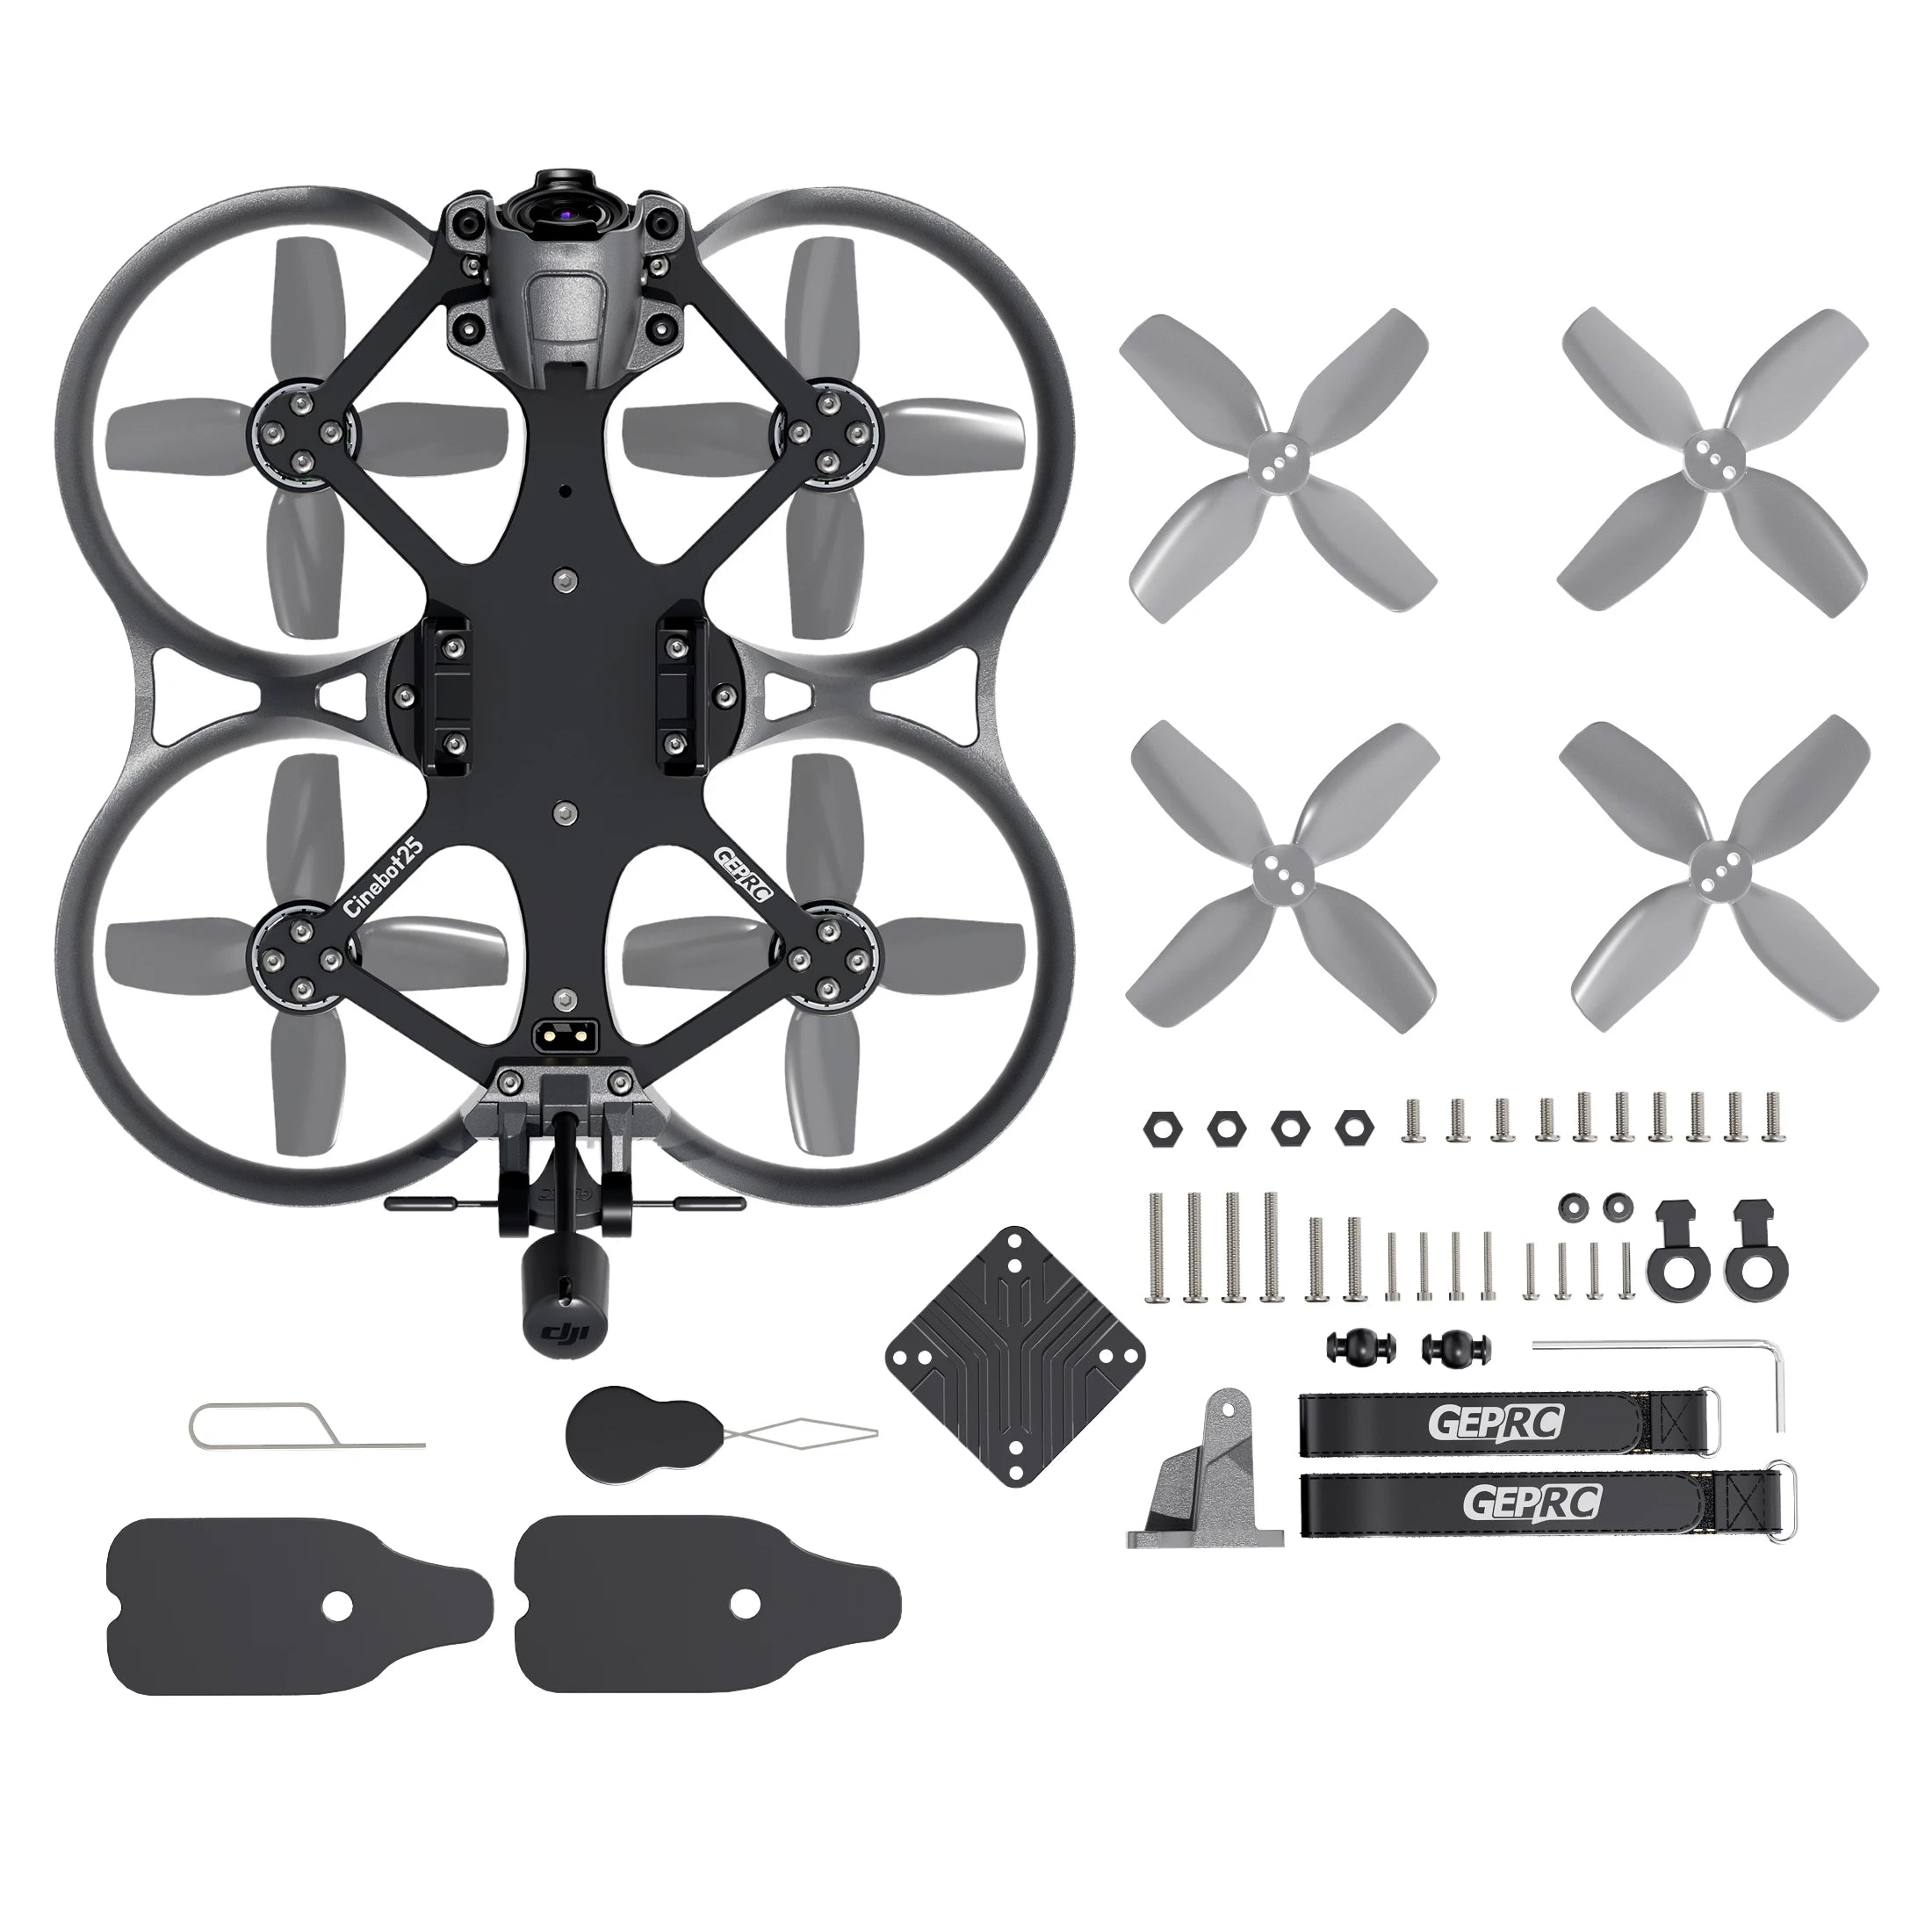 GEPRC Cinebot25 HD O3 FPV Drone, crashes when components have aged or been damaged .